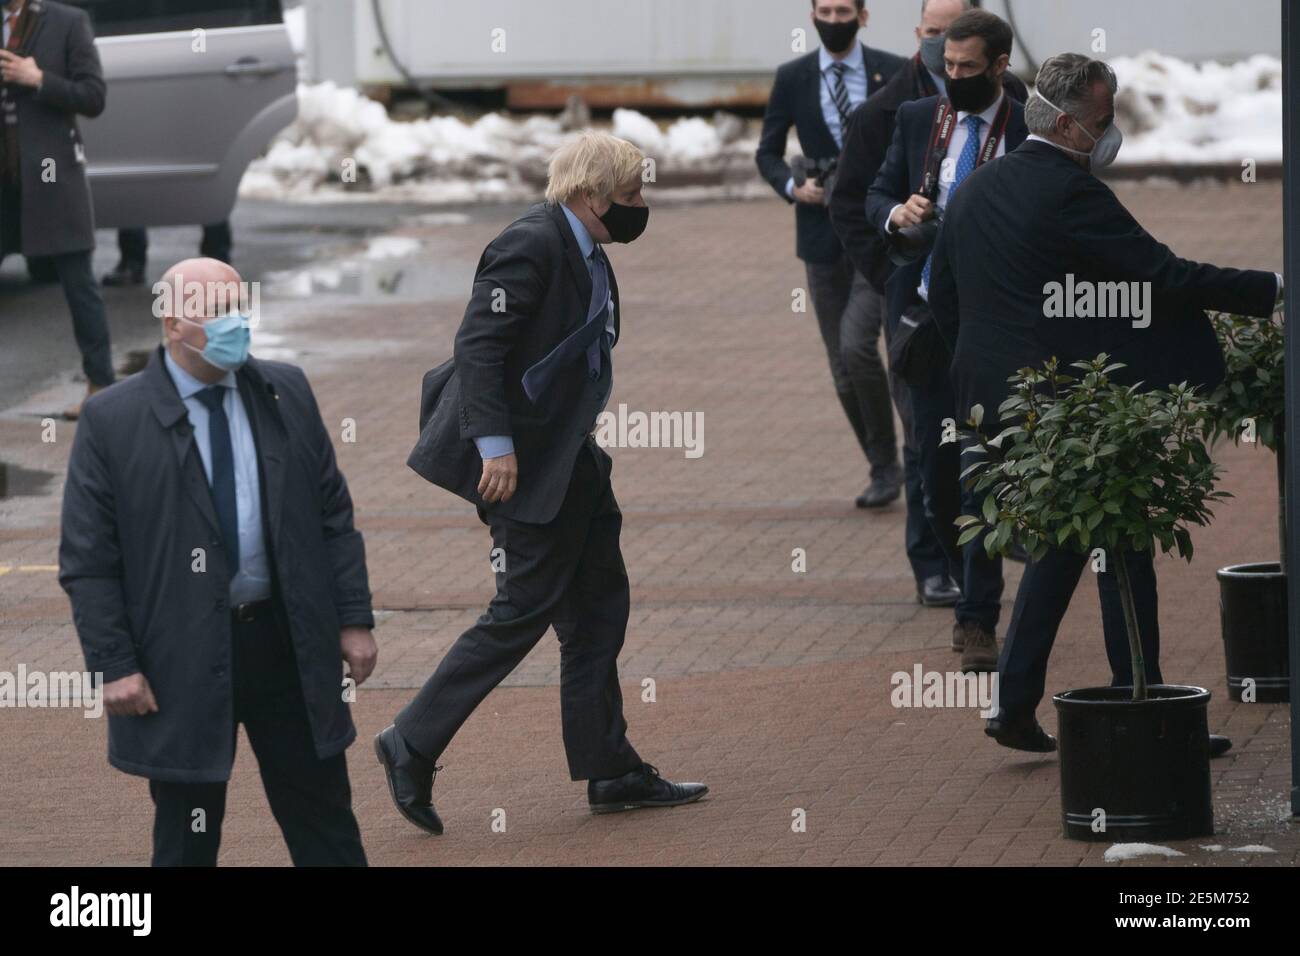 Livingston, Scotland, UK. 28 January 2021. Prime Minister Boris Johnson arrives at Valneva vaccine production plant in Livingston on his visit to Scotland. The plant has commenced production of vaccines today. Iain Masterton/Alamy Live News Stock Photo